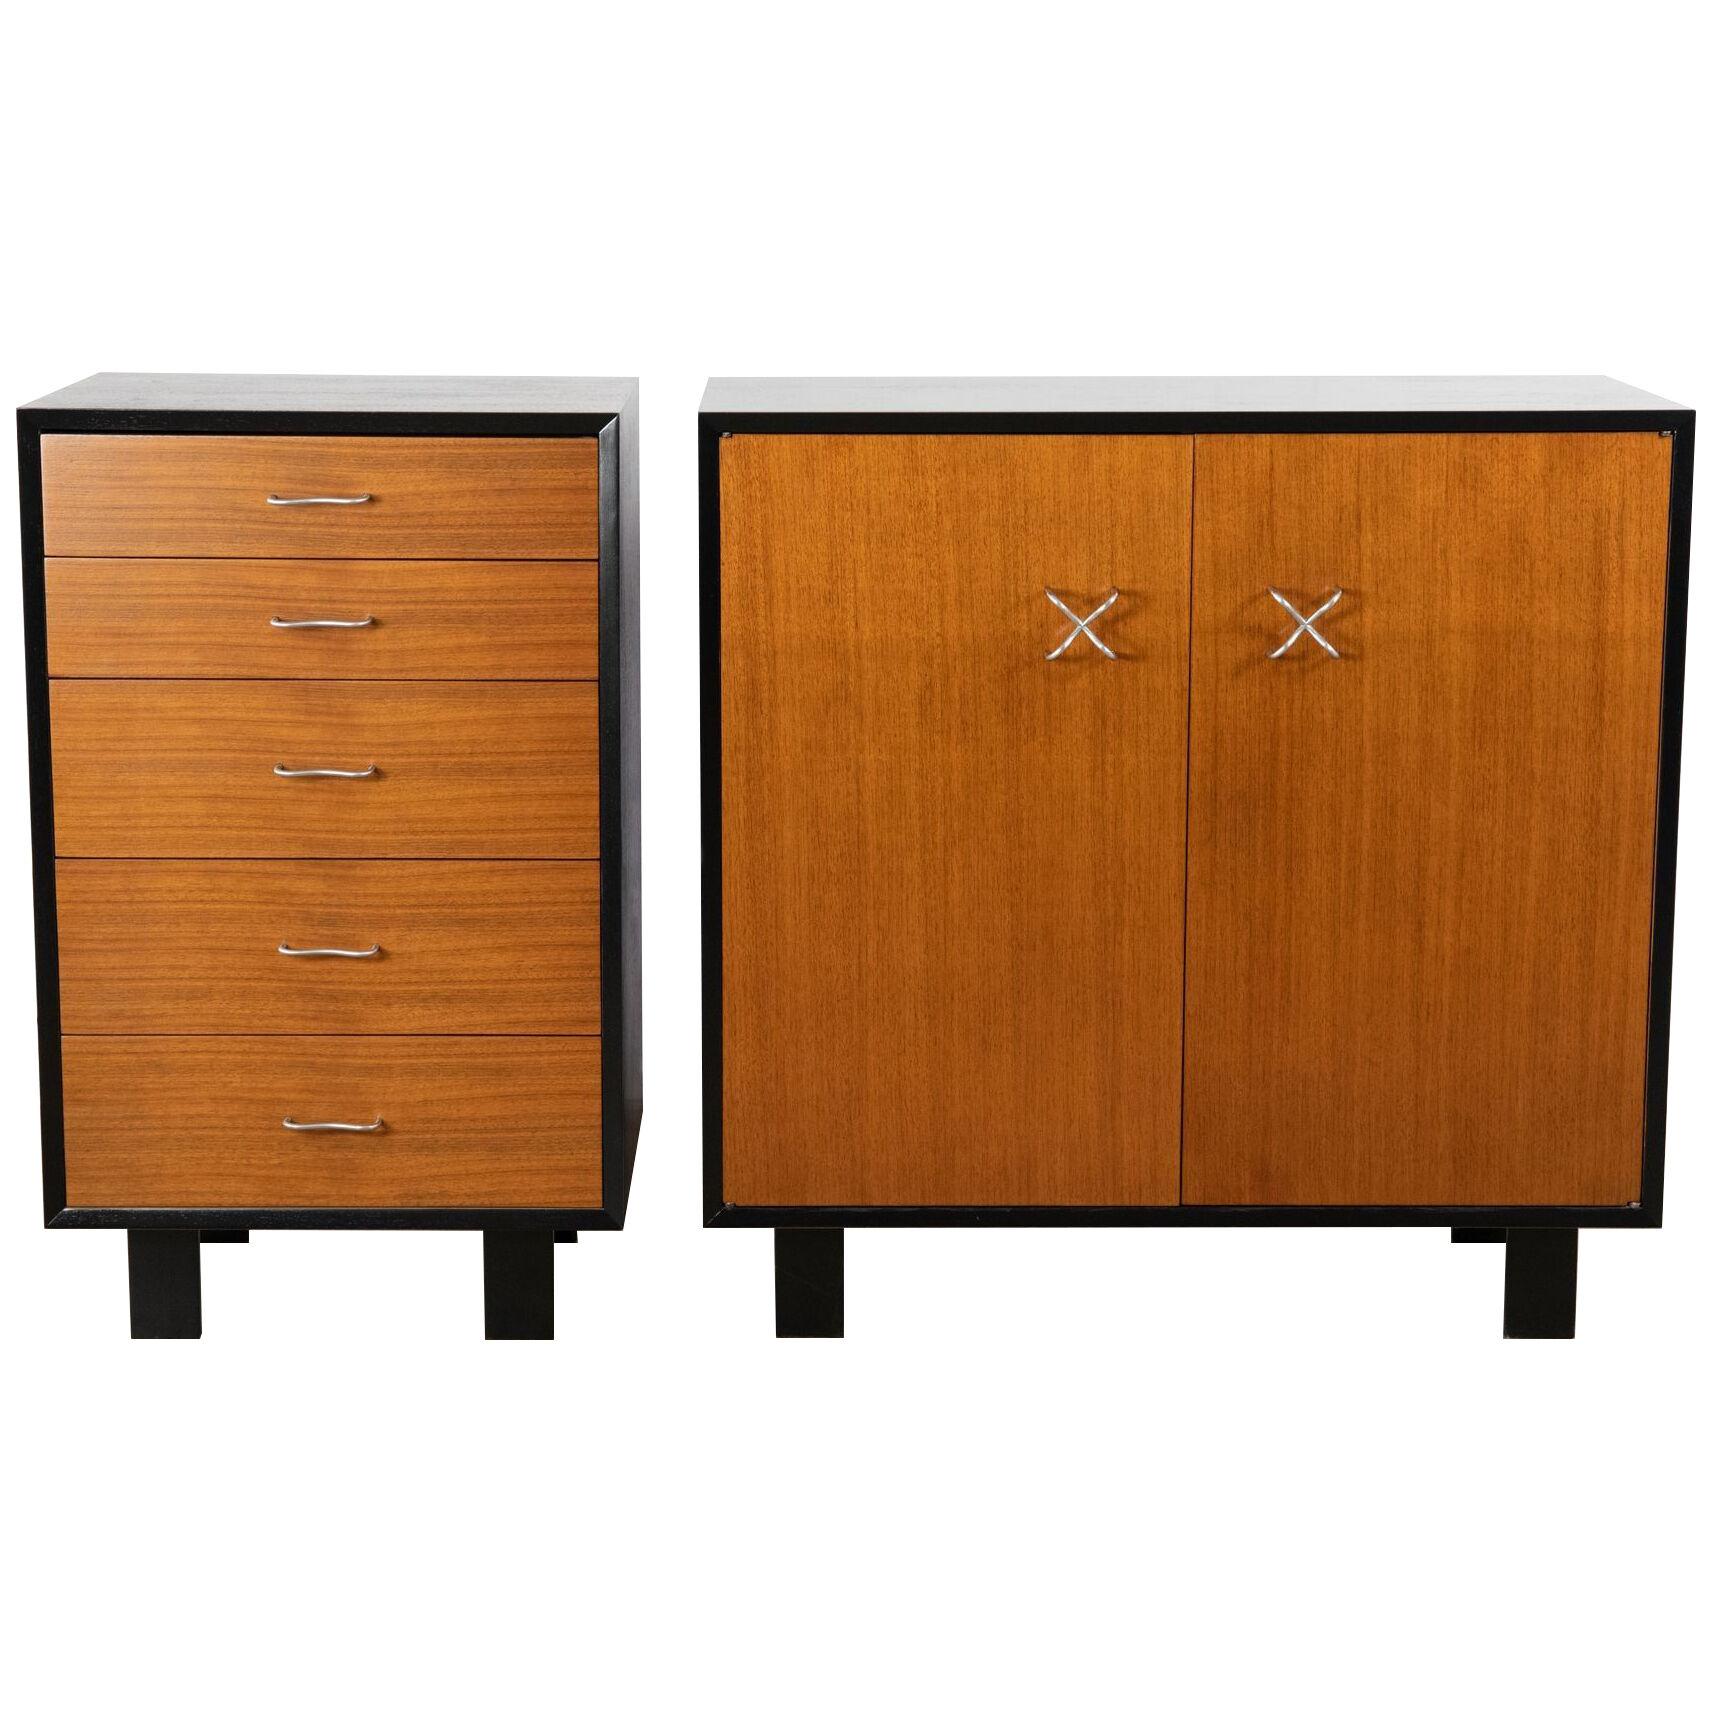 Five Drawer Tall Chest & Two Door Cabinet Server by George Nelson